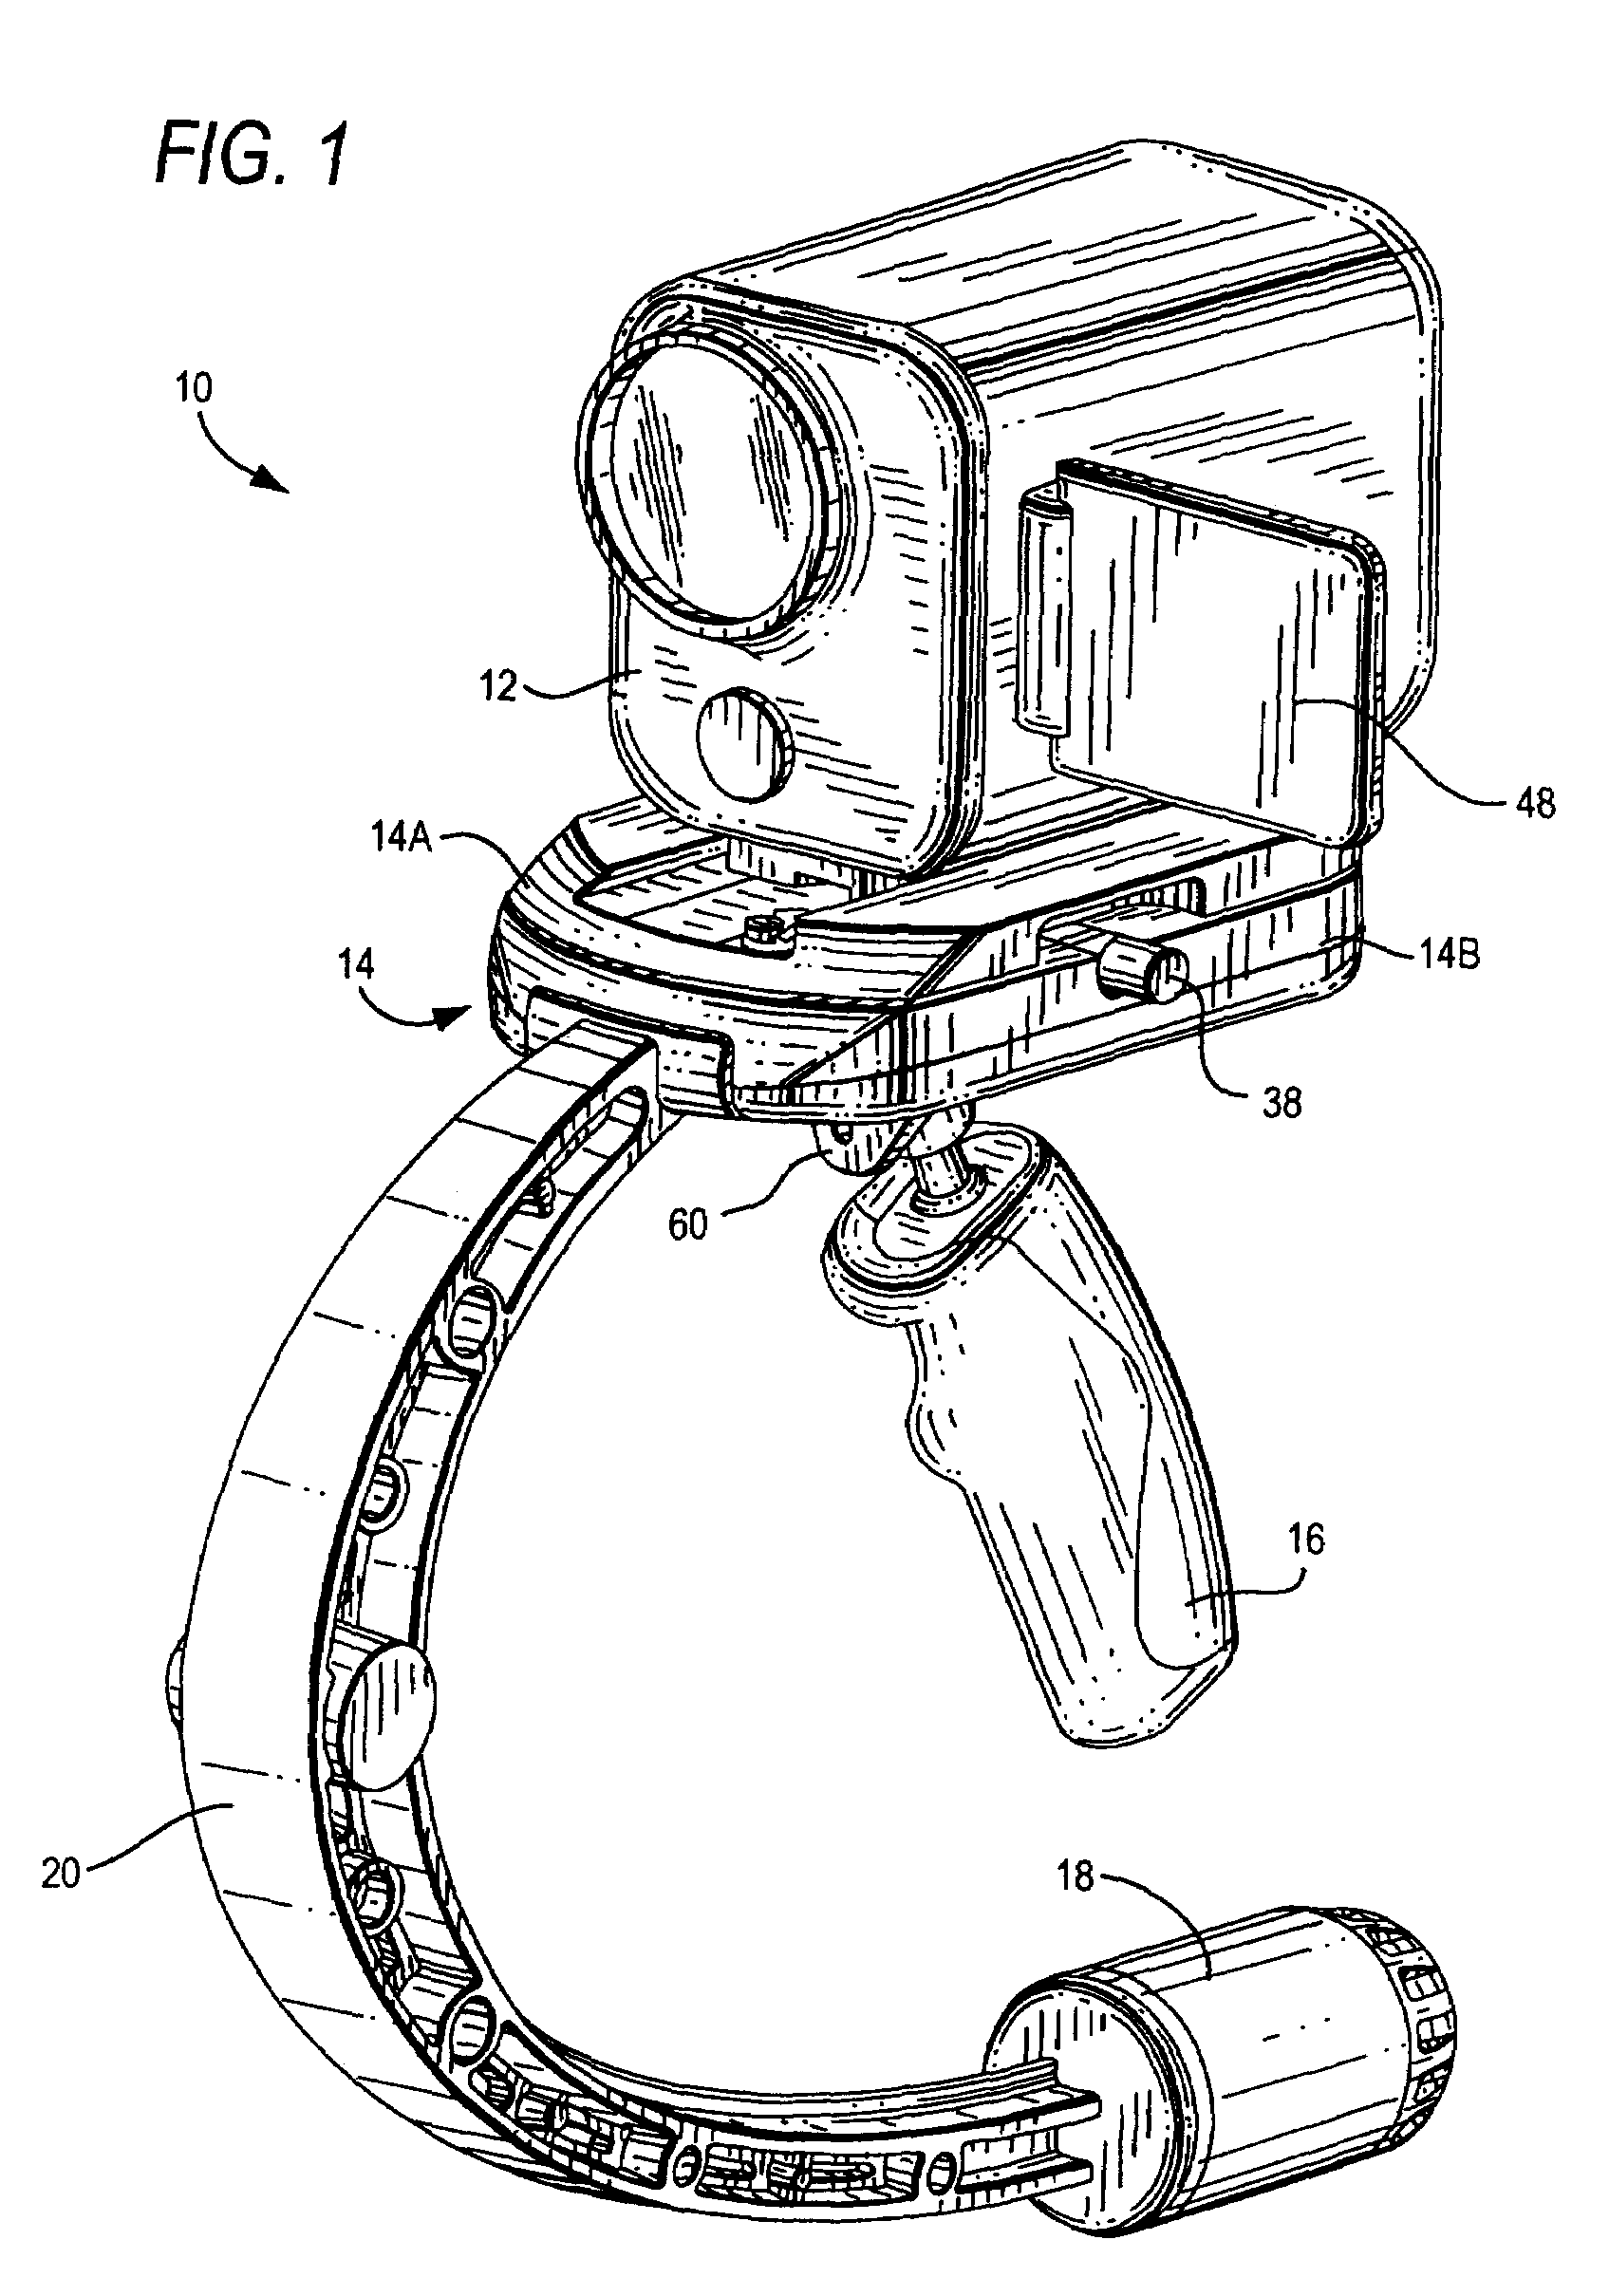 Stabilized equipment support and method of balancing same